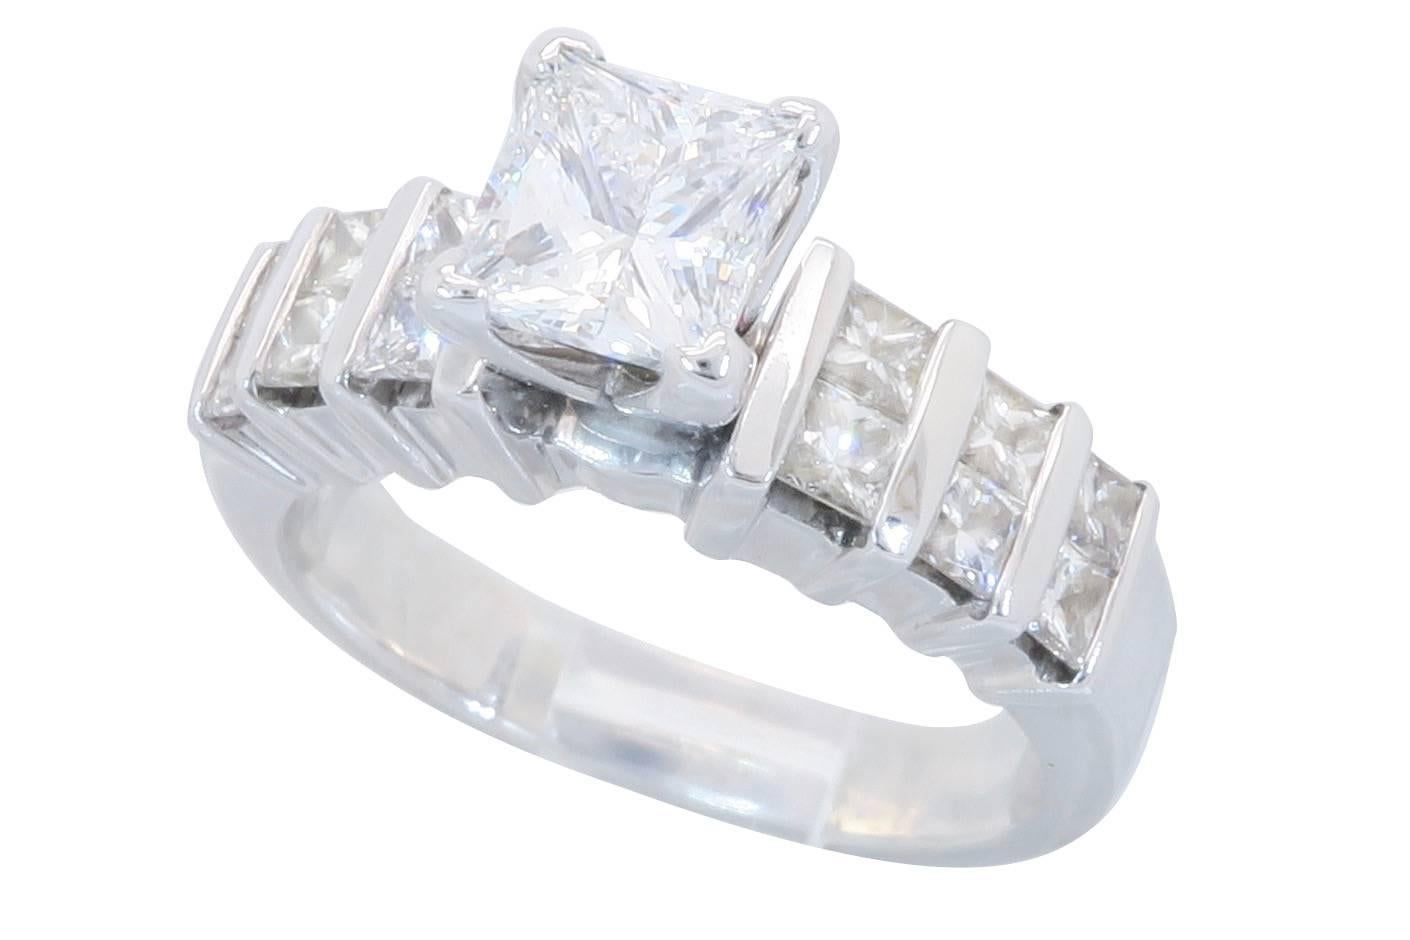 This gorgeous ring features a EGL USA Certified .70CT Princess Cut Diamond in the center. The diamond is certified to have D color and VS2 clarity according to EGL USA. It is accented by 12 Princess Cut Diamonds. The total diamond weight is